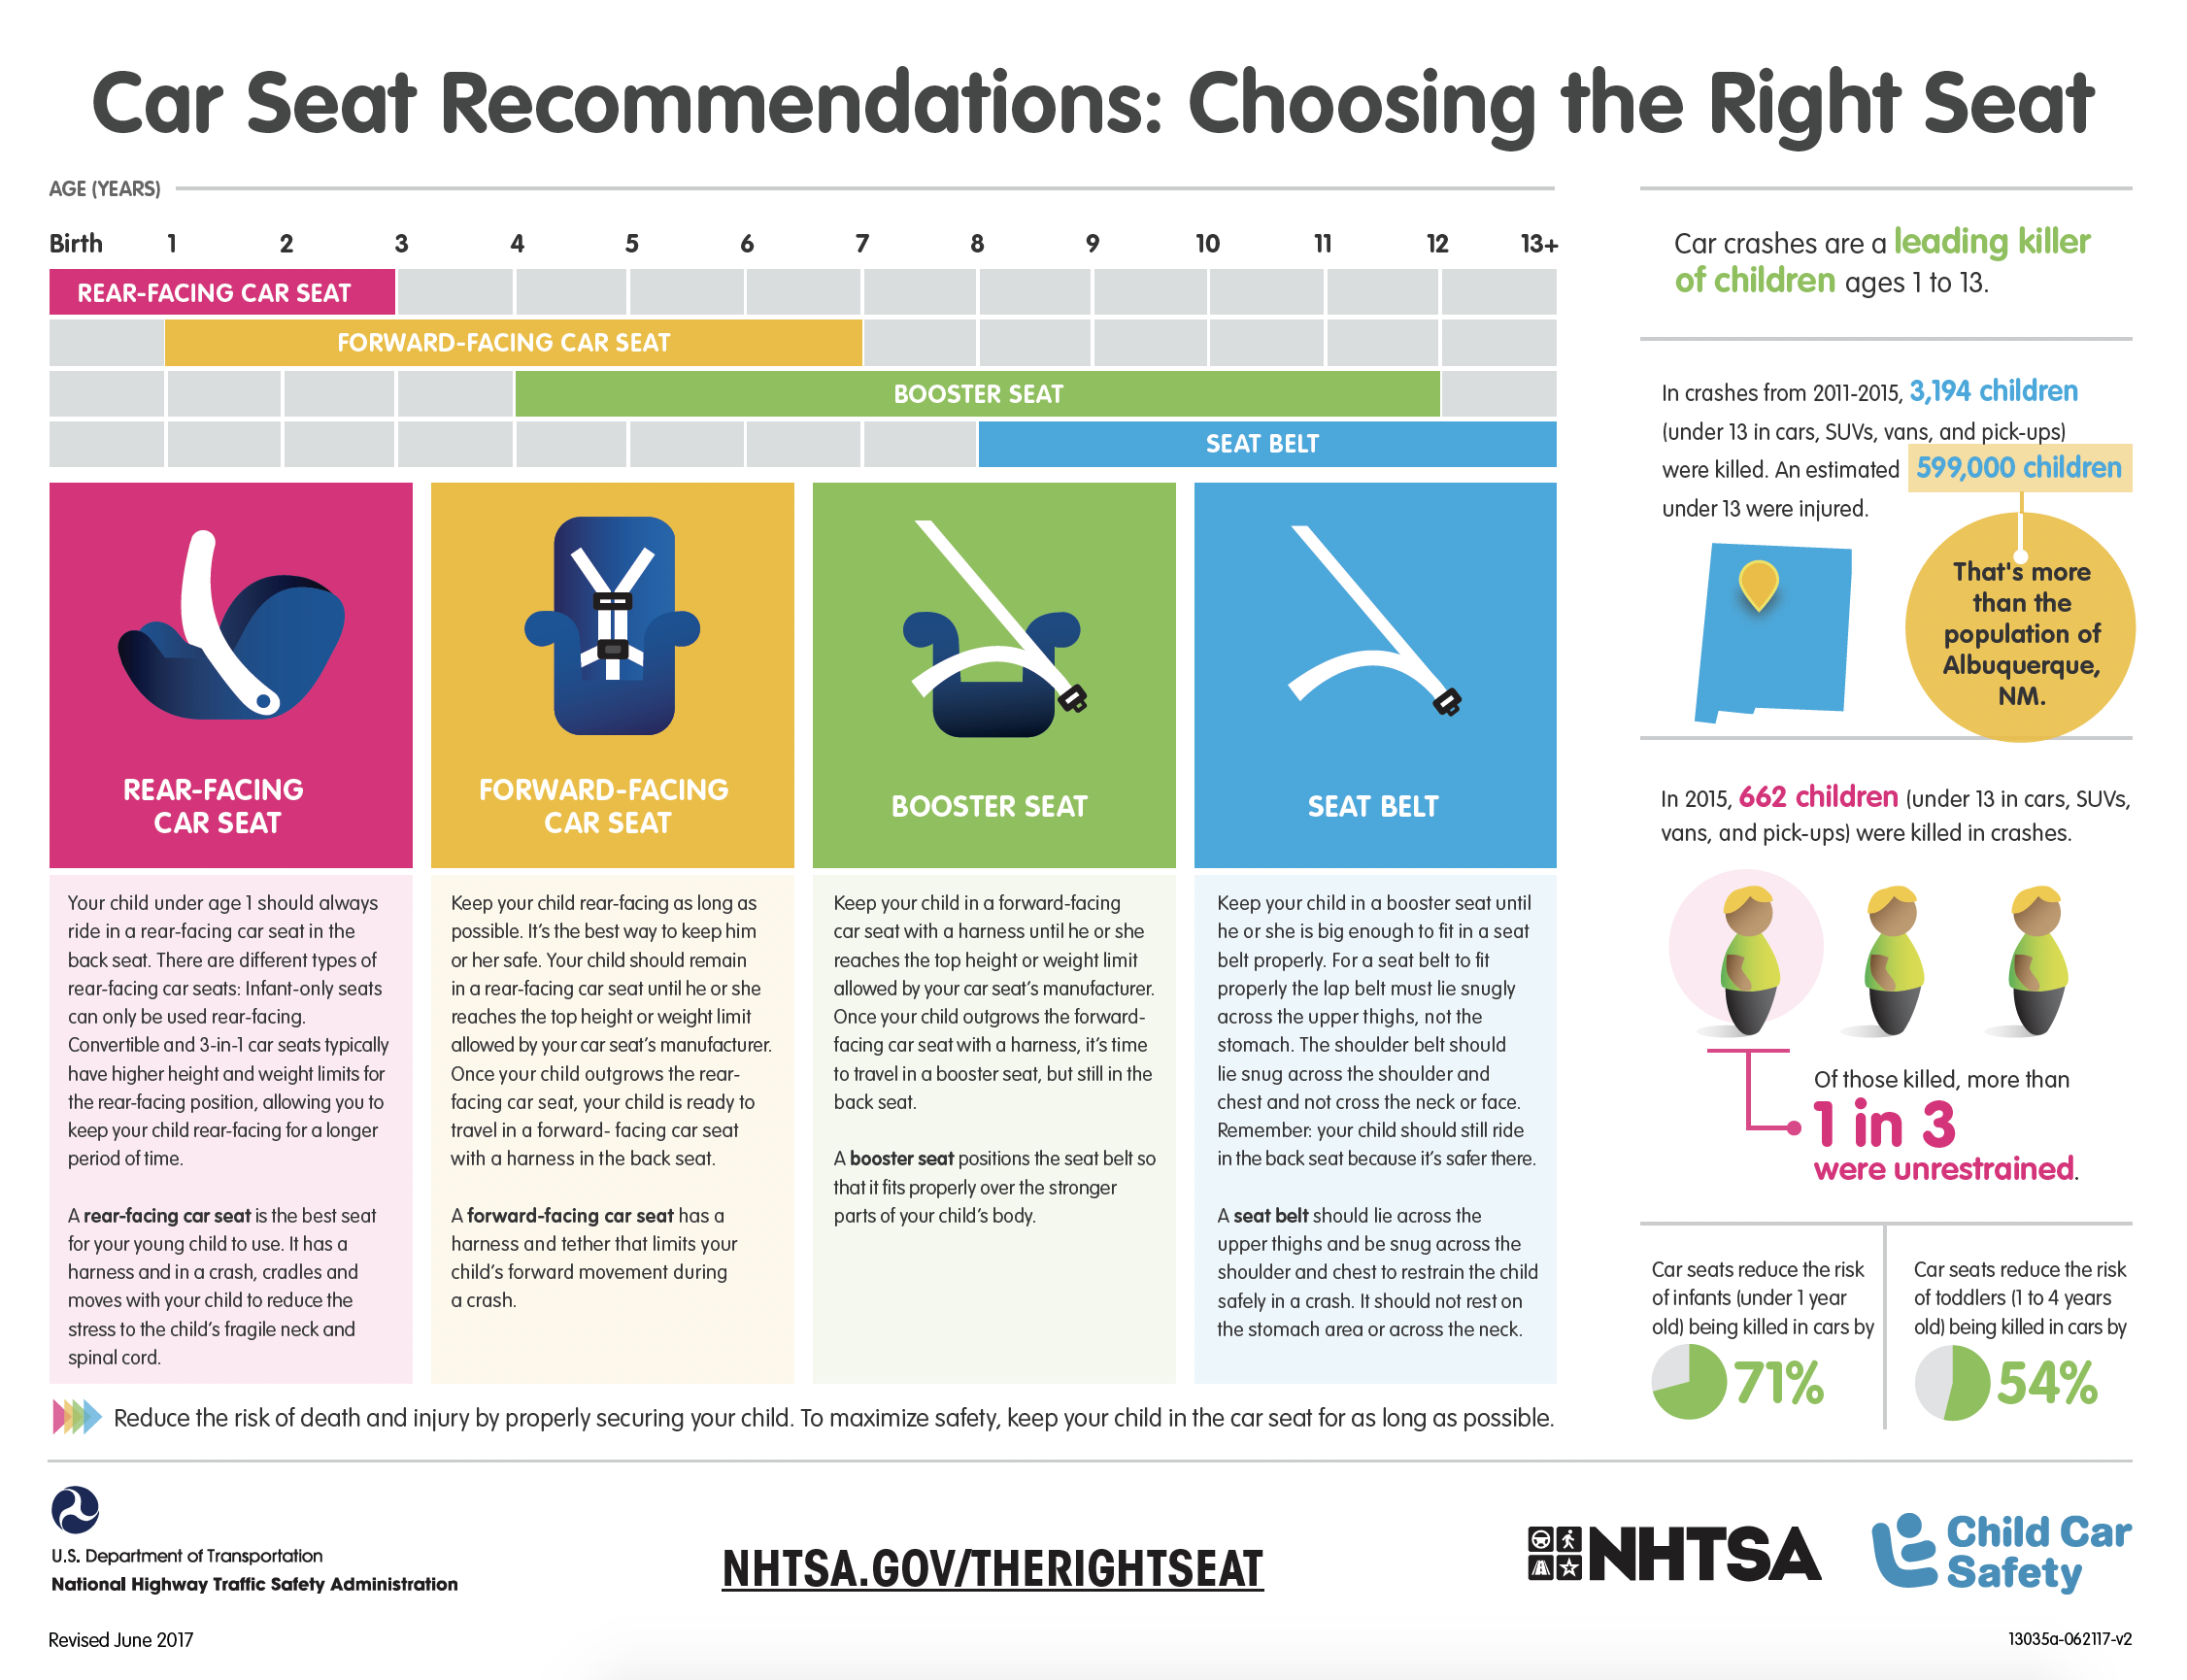 Infographic from NHTSA with details about how to choose the right car seat for your child's age, weight and height